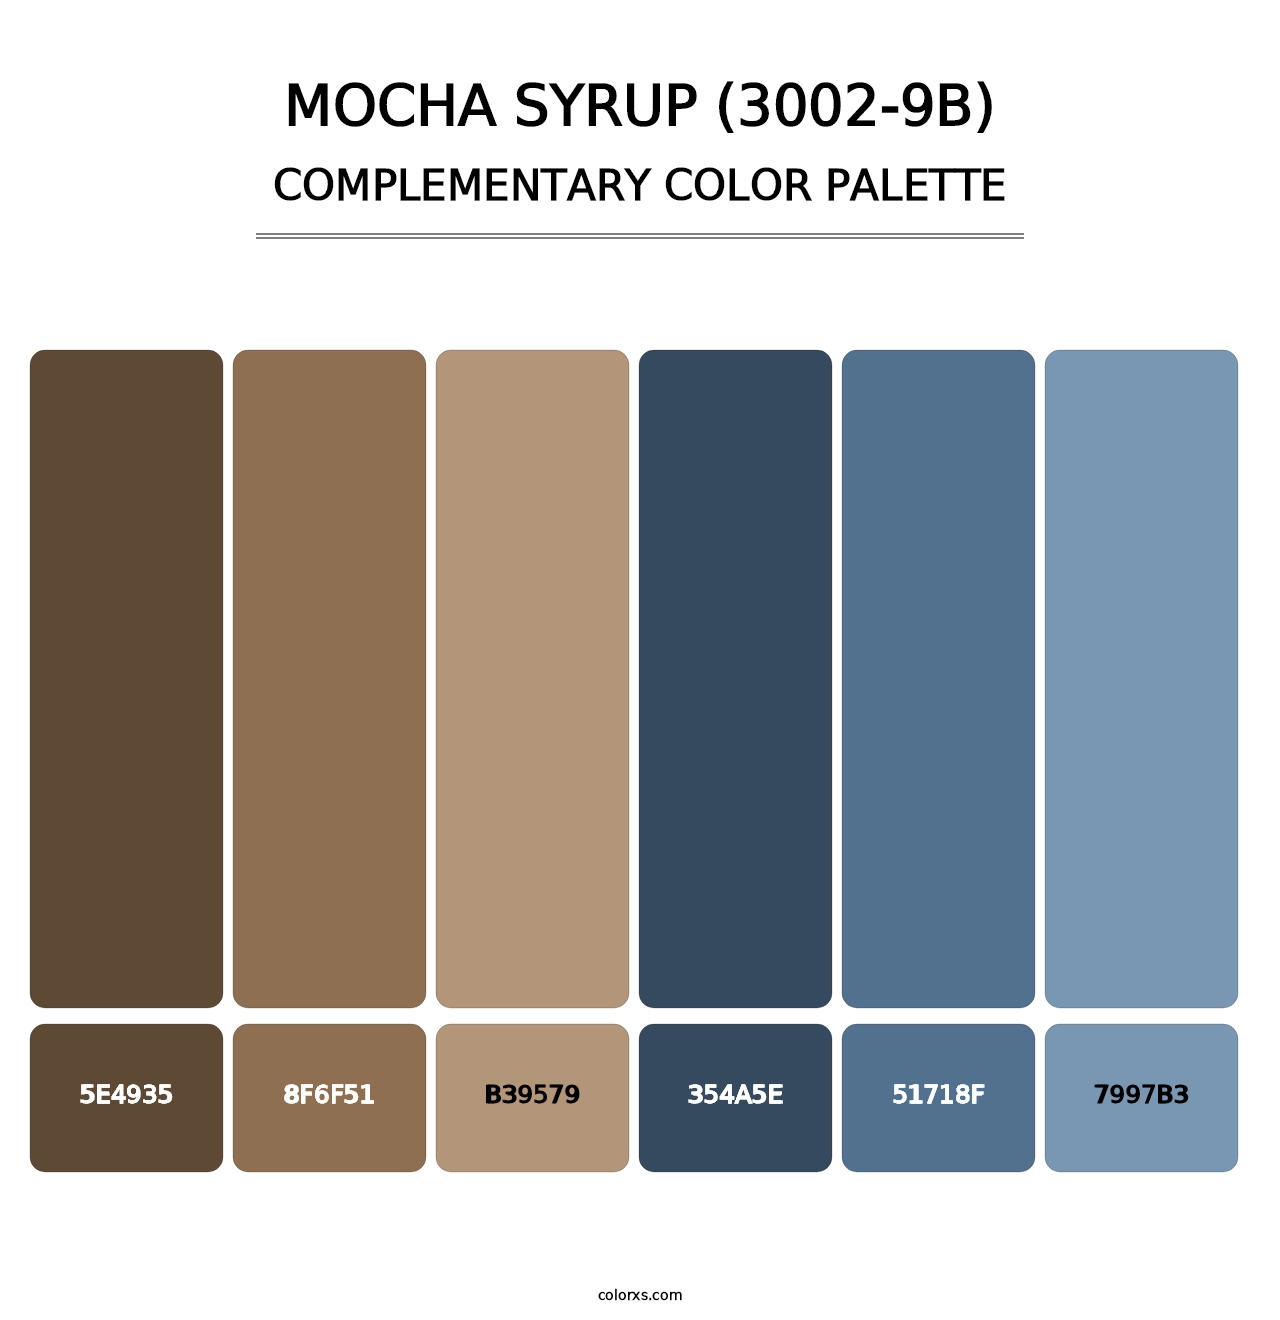 Mocha Syrup (3002-9B) - Complementary Color Palette